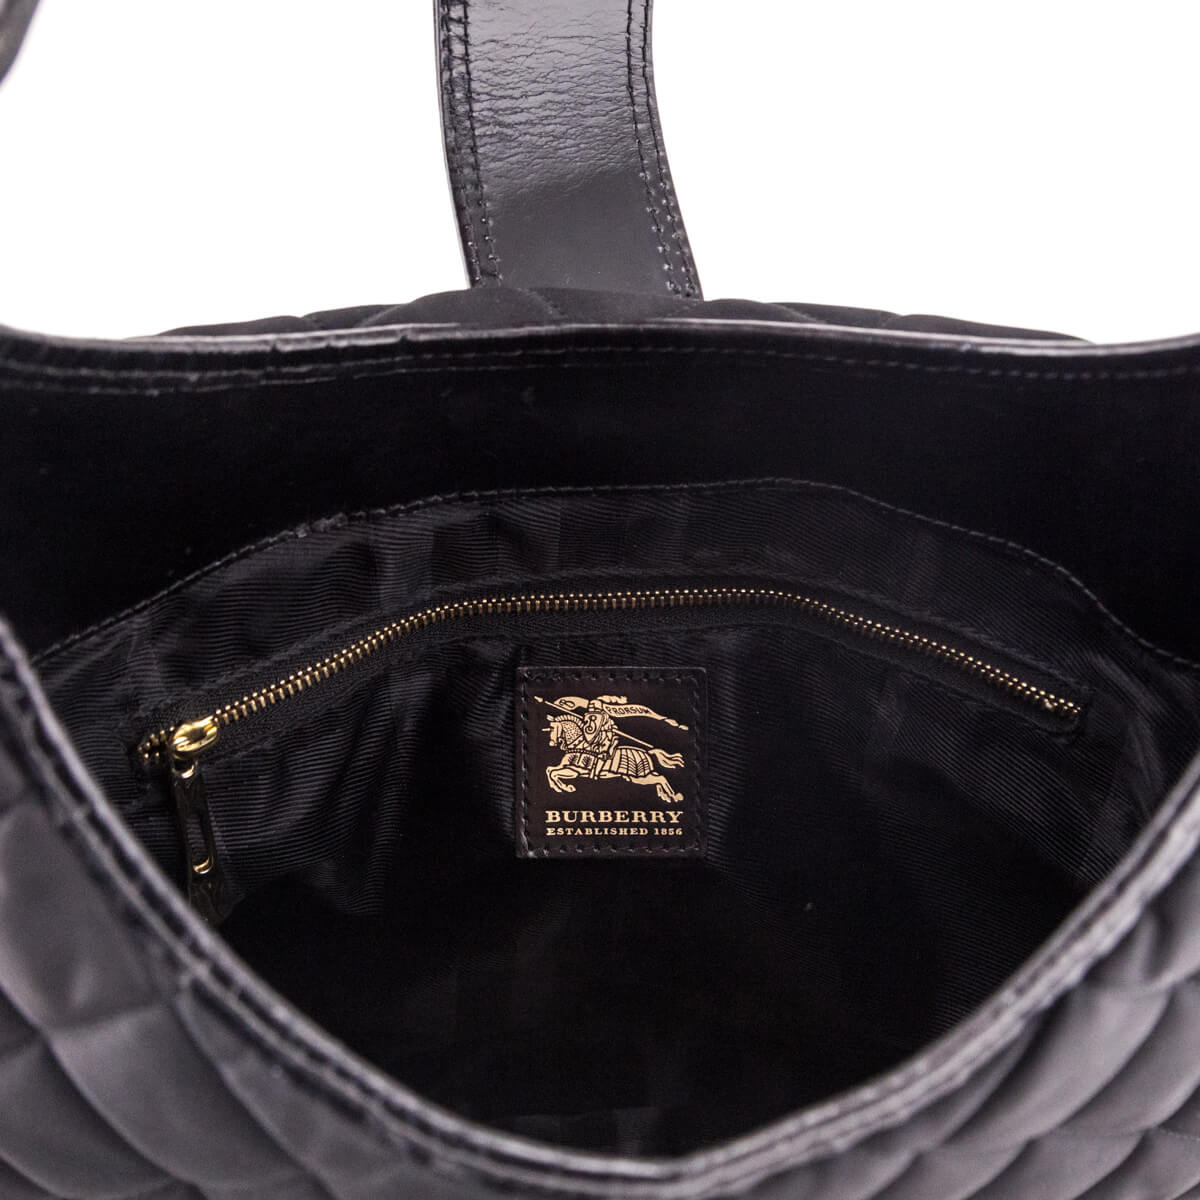 Burberry Black Quilted Leather Brook Hobo Bag 41bur122